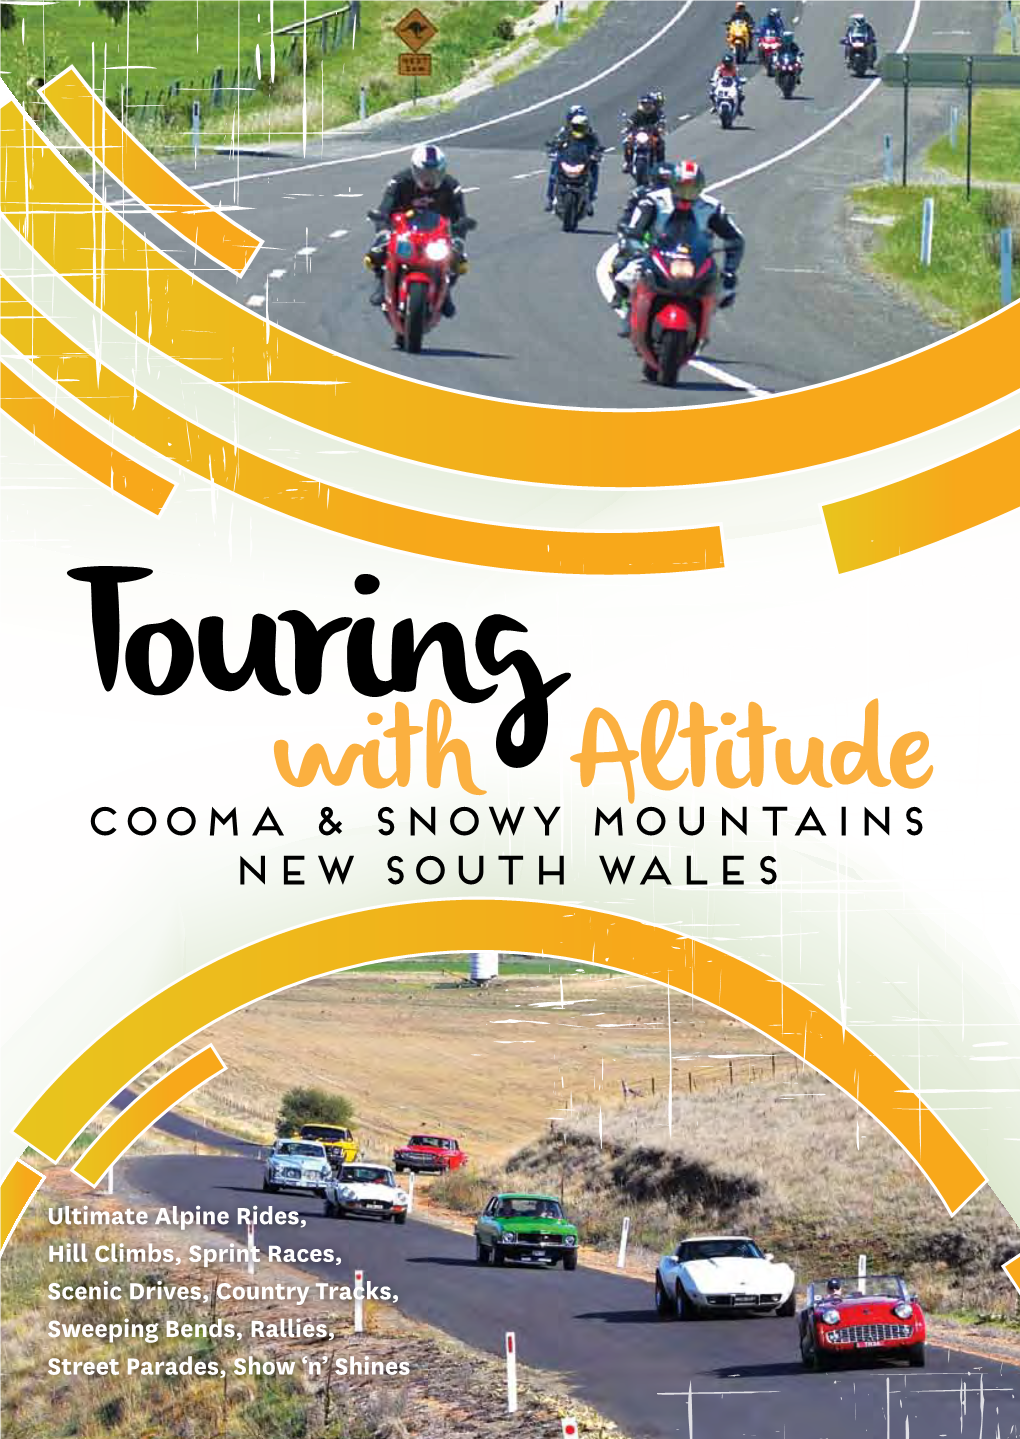 Cooma & Snowy Mountains New South Wales